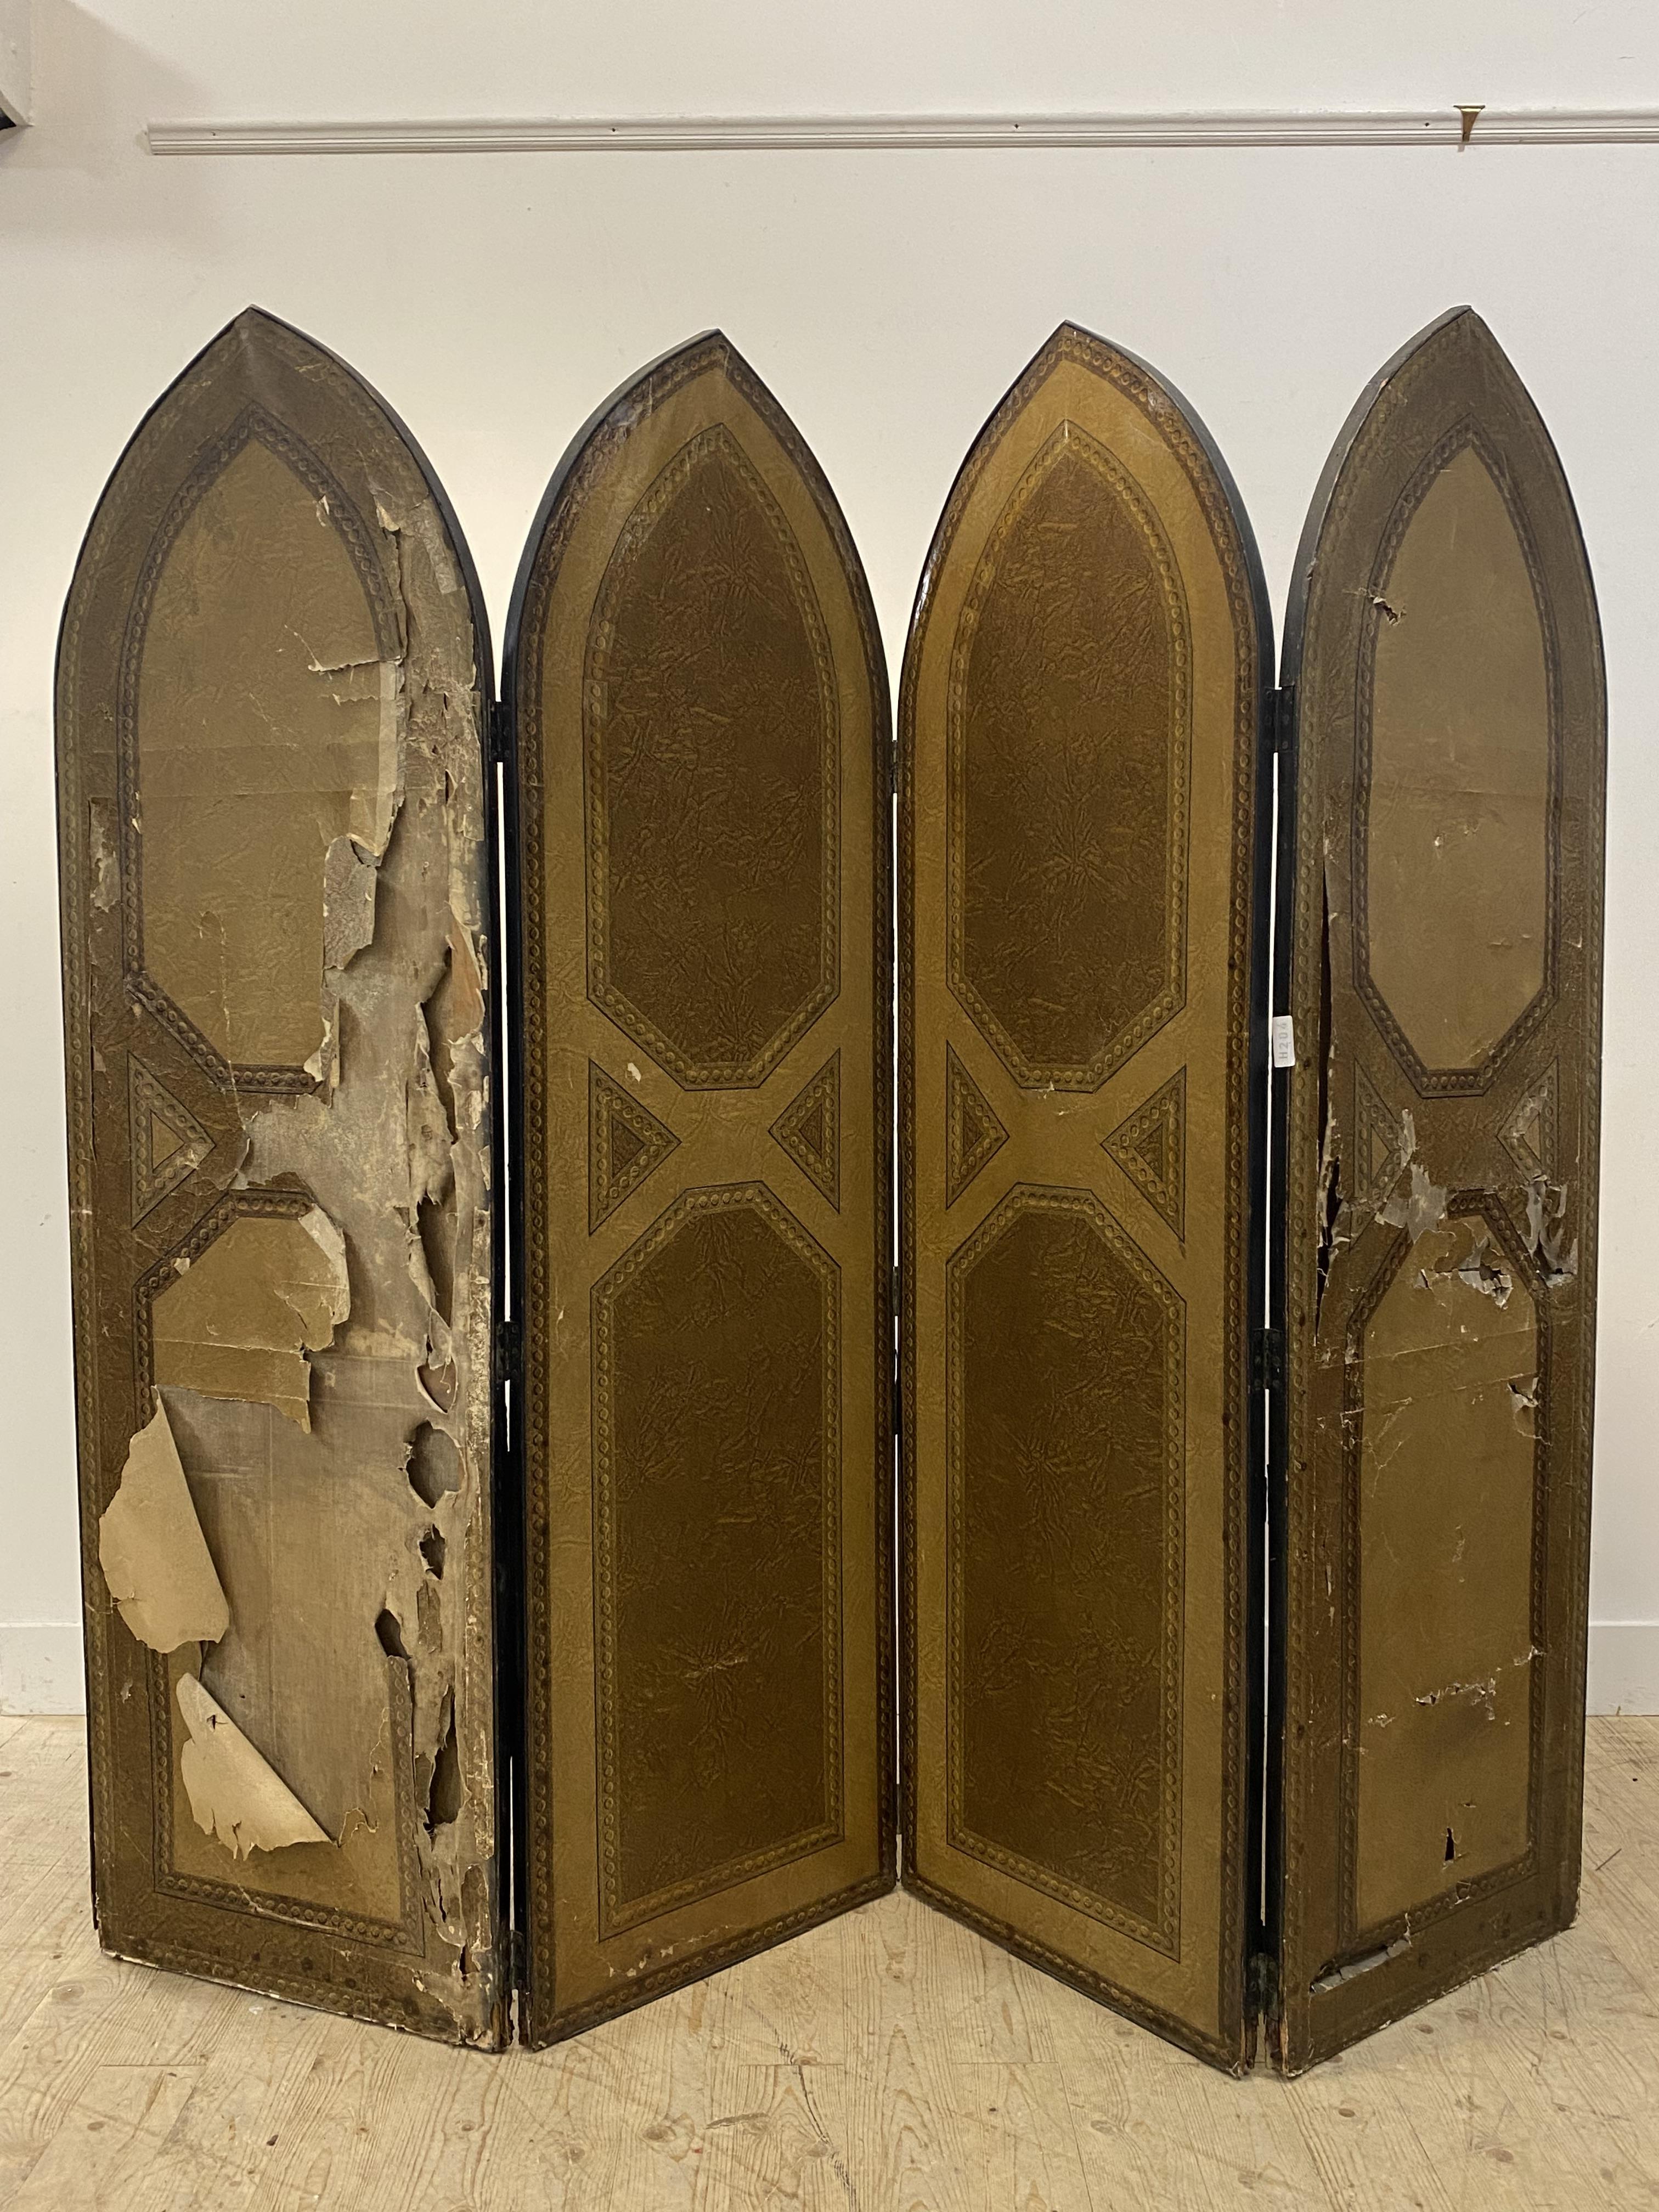 A Victorian Gothic Revival four-arch panel room divider, each panel printed in a floral design - Image 2 of 2